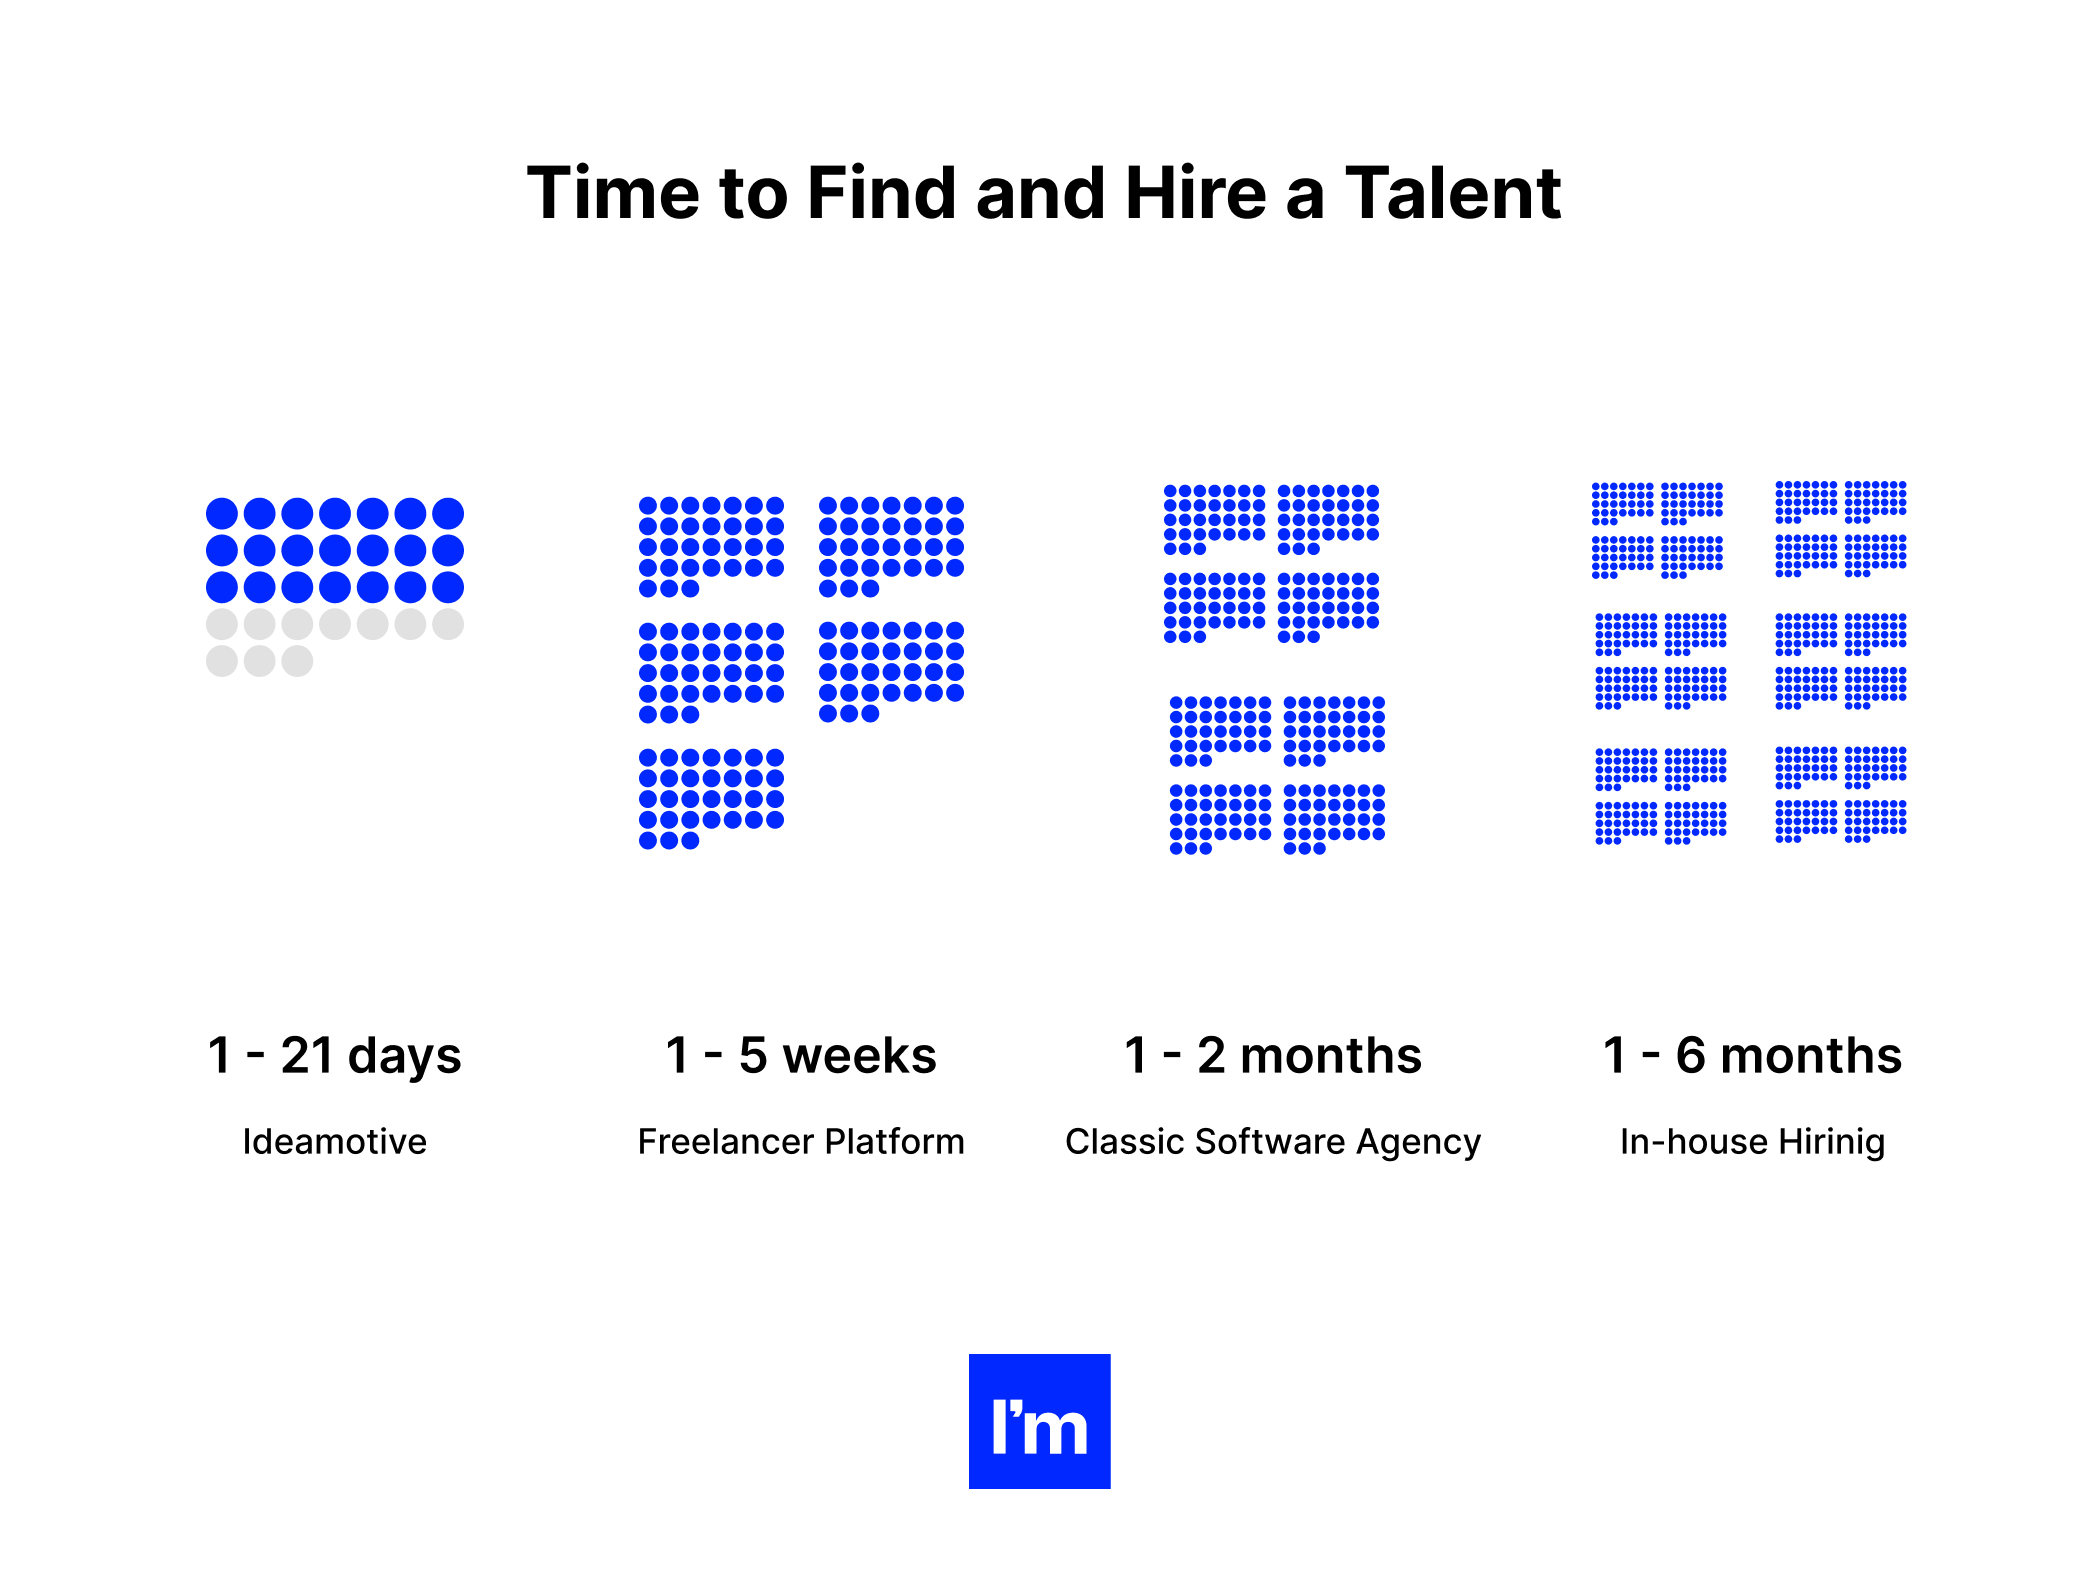 Time to find and hire tech talent